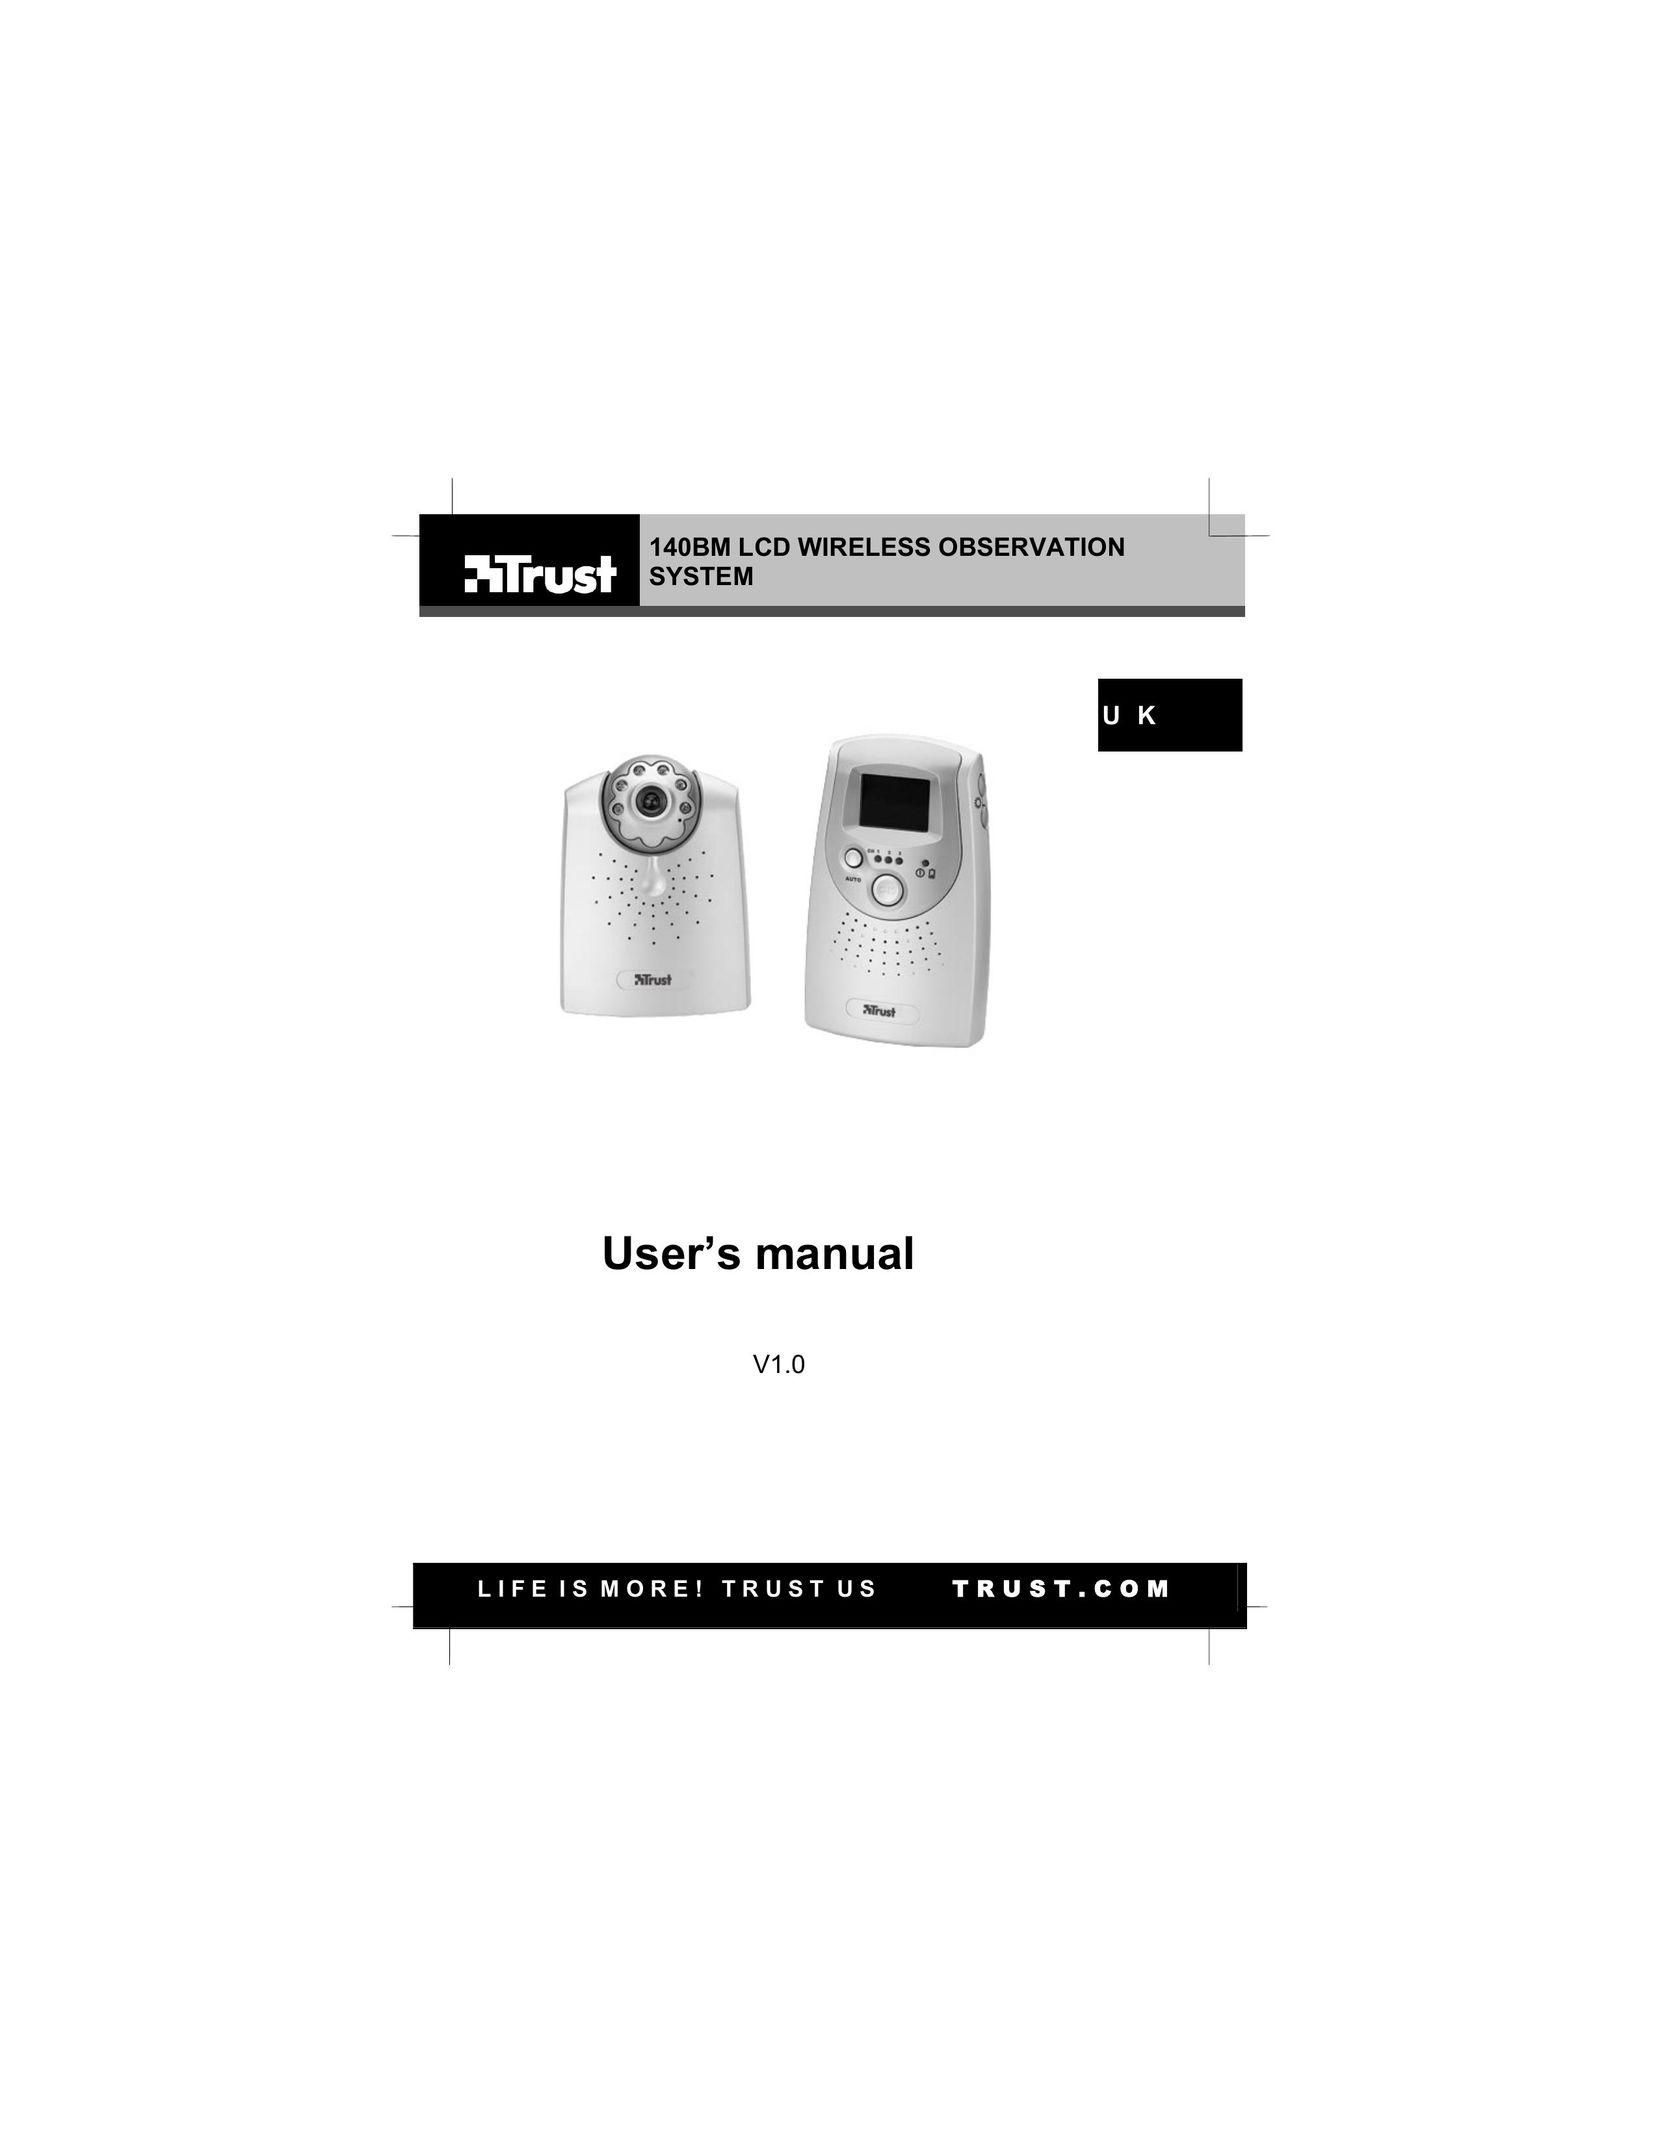 Trust Computer Products 140BM Home Security System User Manual